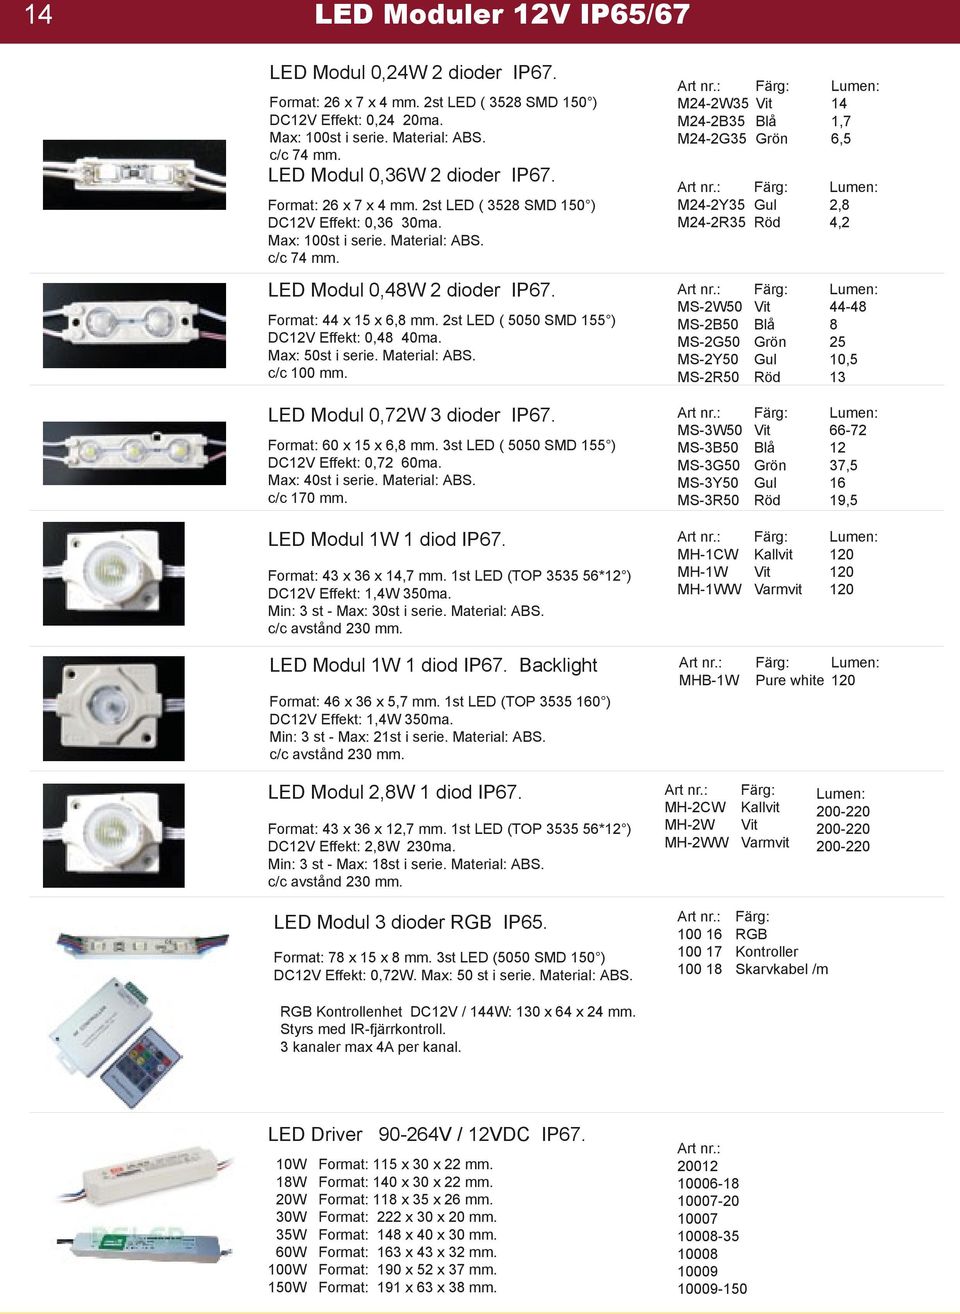 Format: 44 x 15 x 6,8 mm. 2st LED ( 5050 SMD 155 ) DC12V Effekt: 0,48 40ma. Max: 50st i serie. Material: ABS. c/c 100 mm. LED Modul 0,72W 3 dioder IP67. Format: 60 x 15 x 6,8 mm.